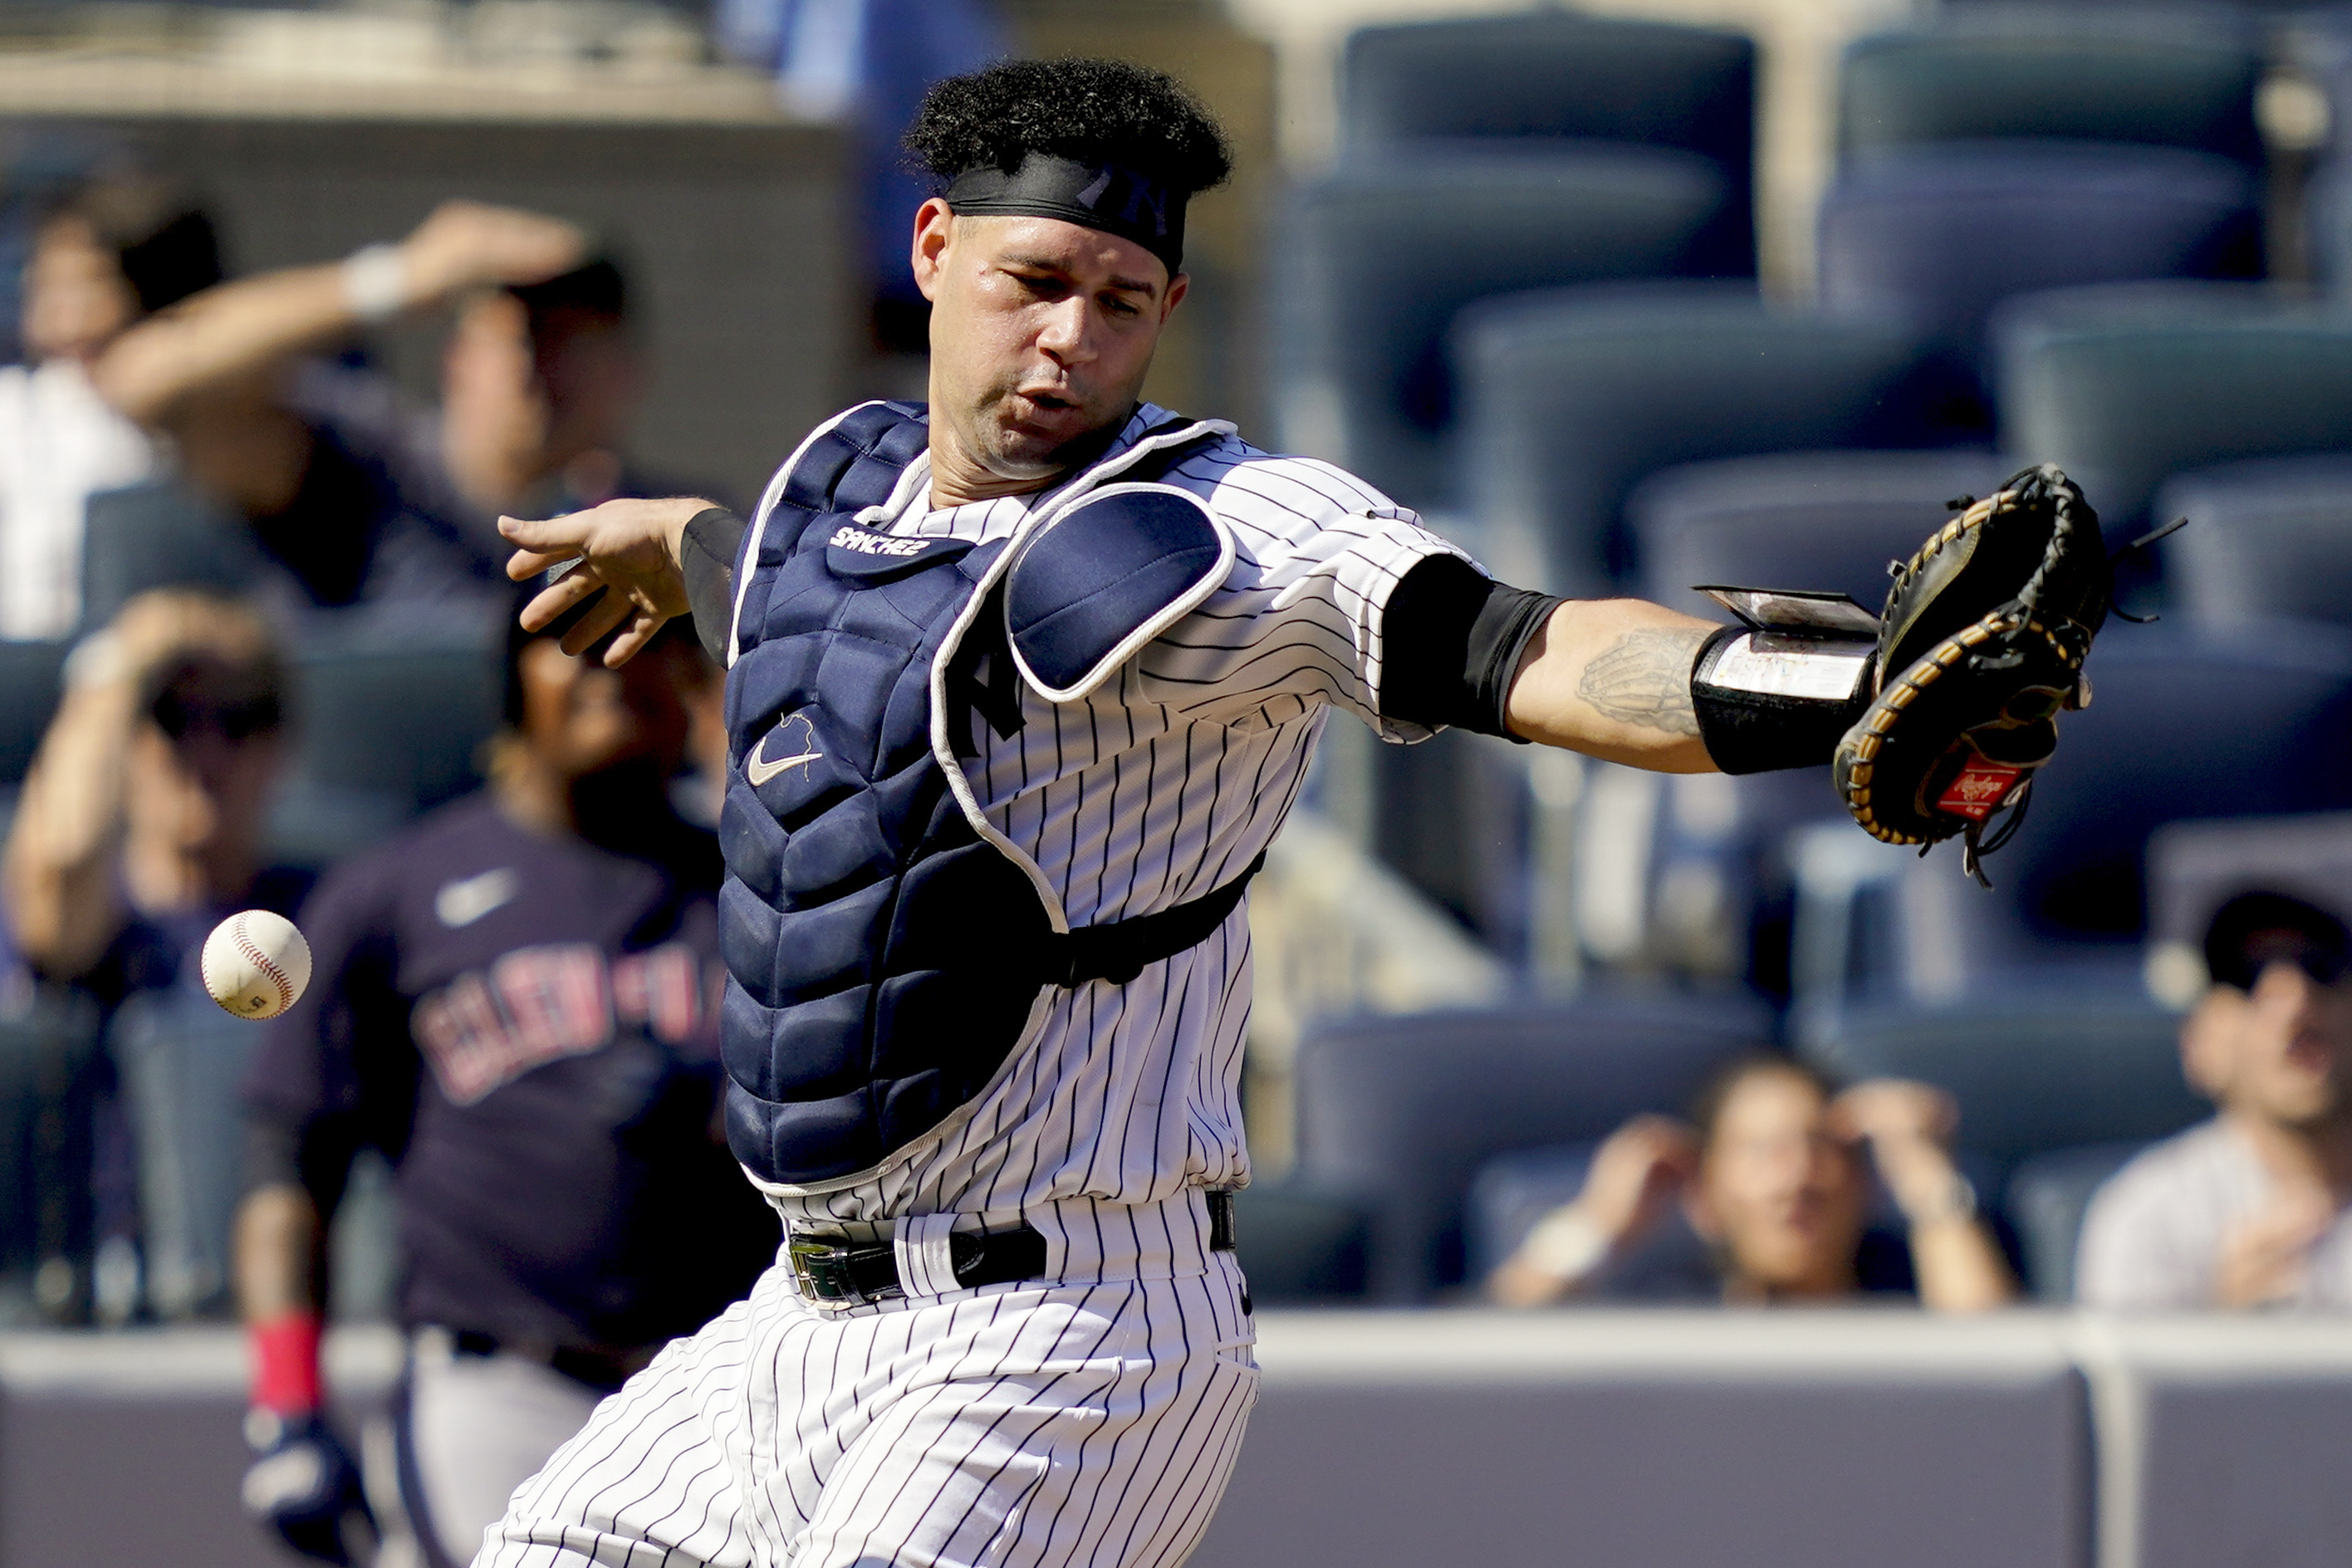 Gary Sanchez hits first career walk-off HR, lift NY Yankees over Twins